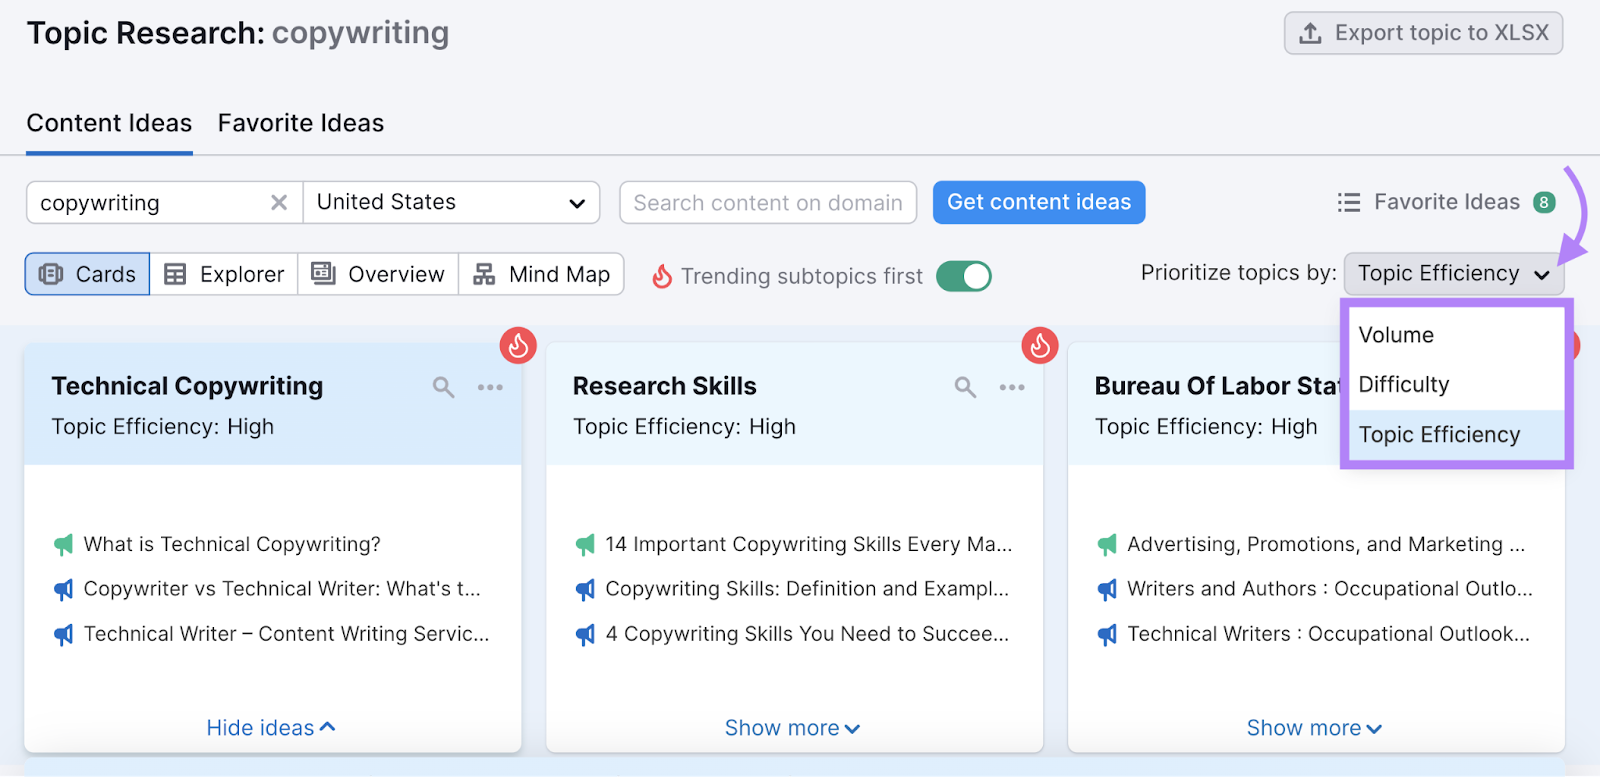 "Topic Efficiency" filter successful  Topic Research tool